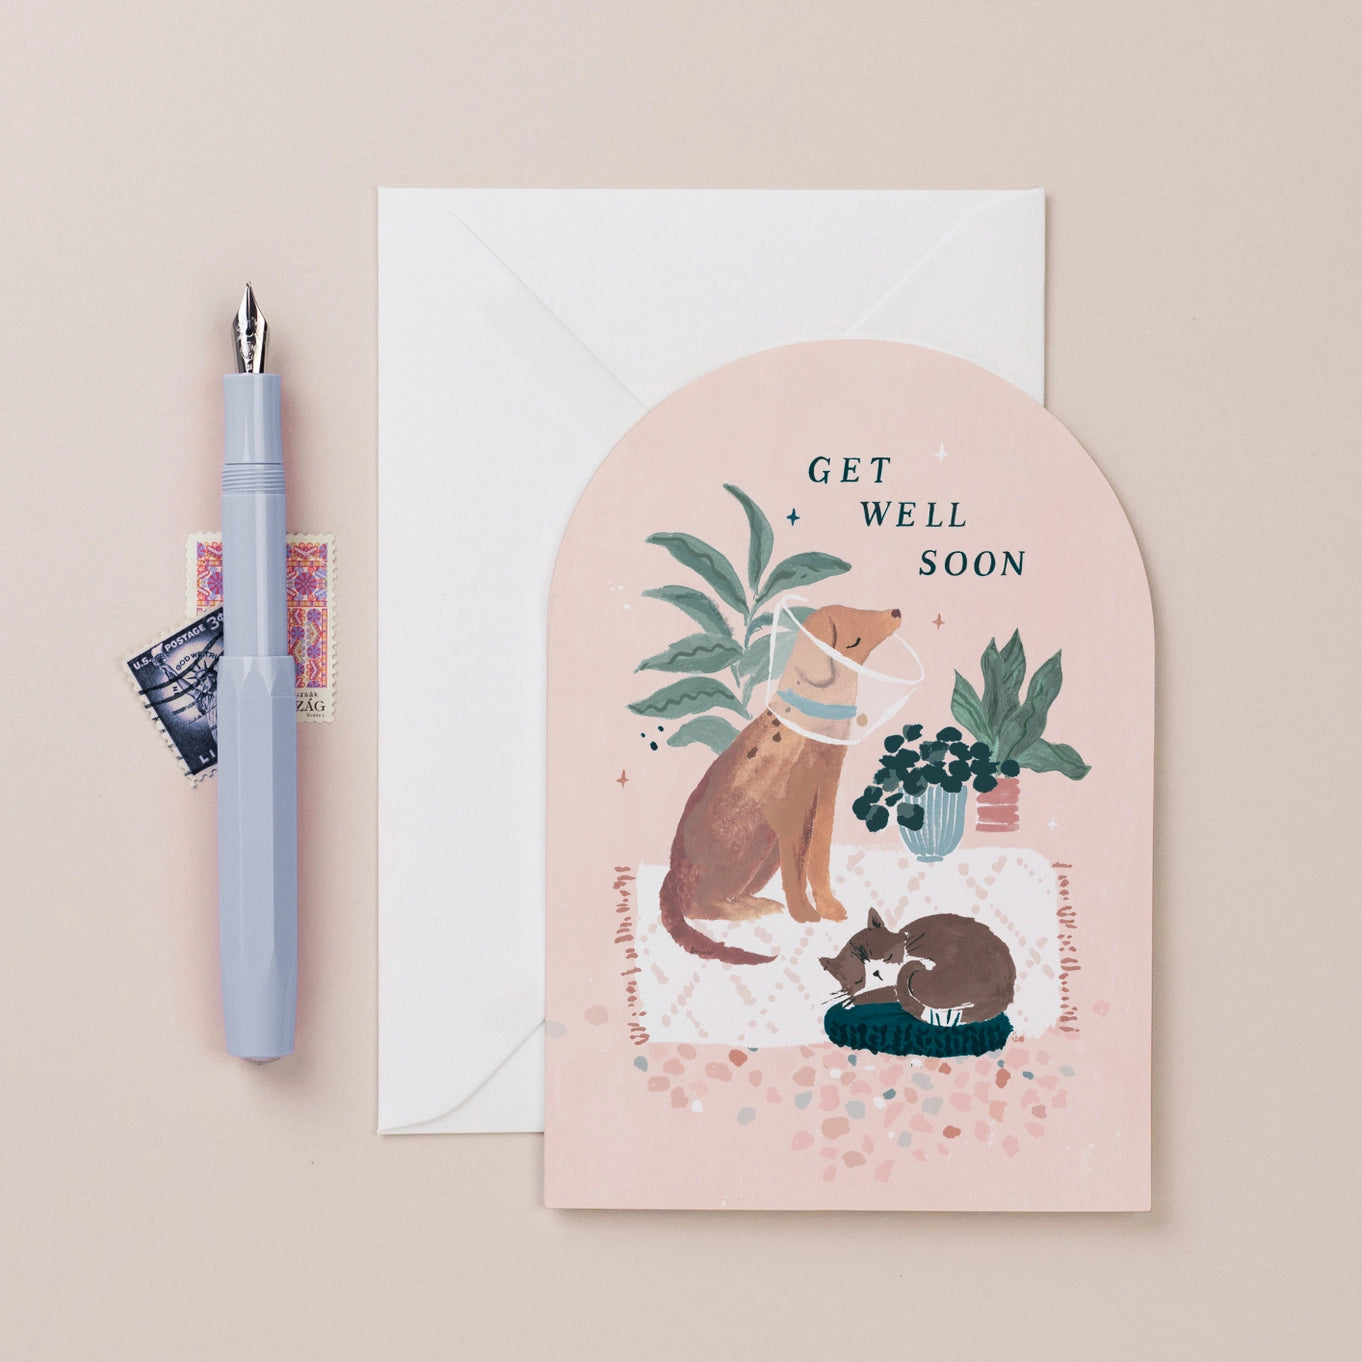 Get Well Soon Card By Sister Paper Co.